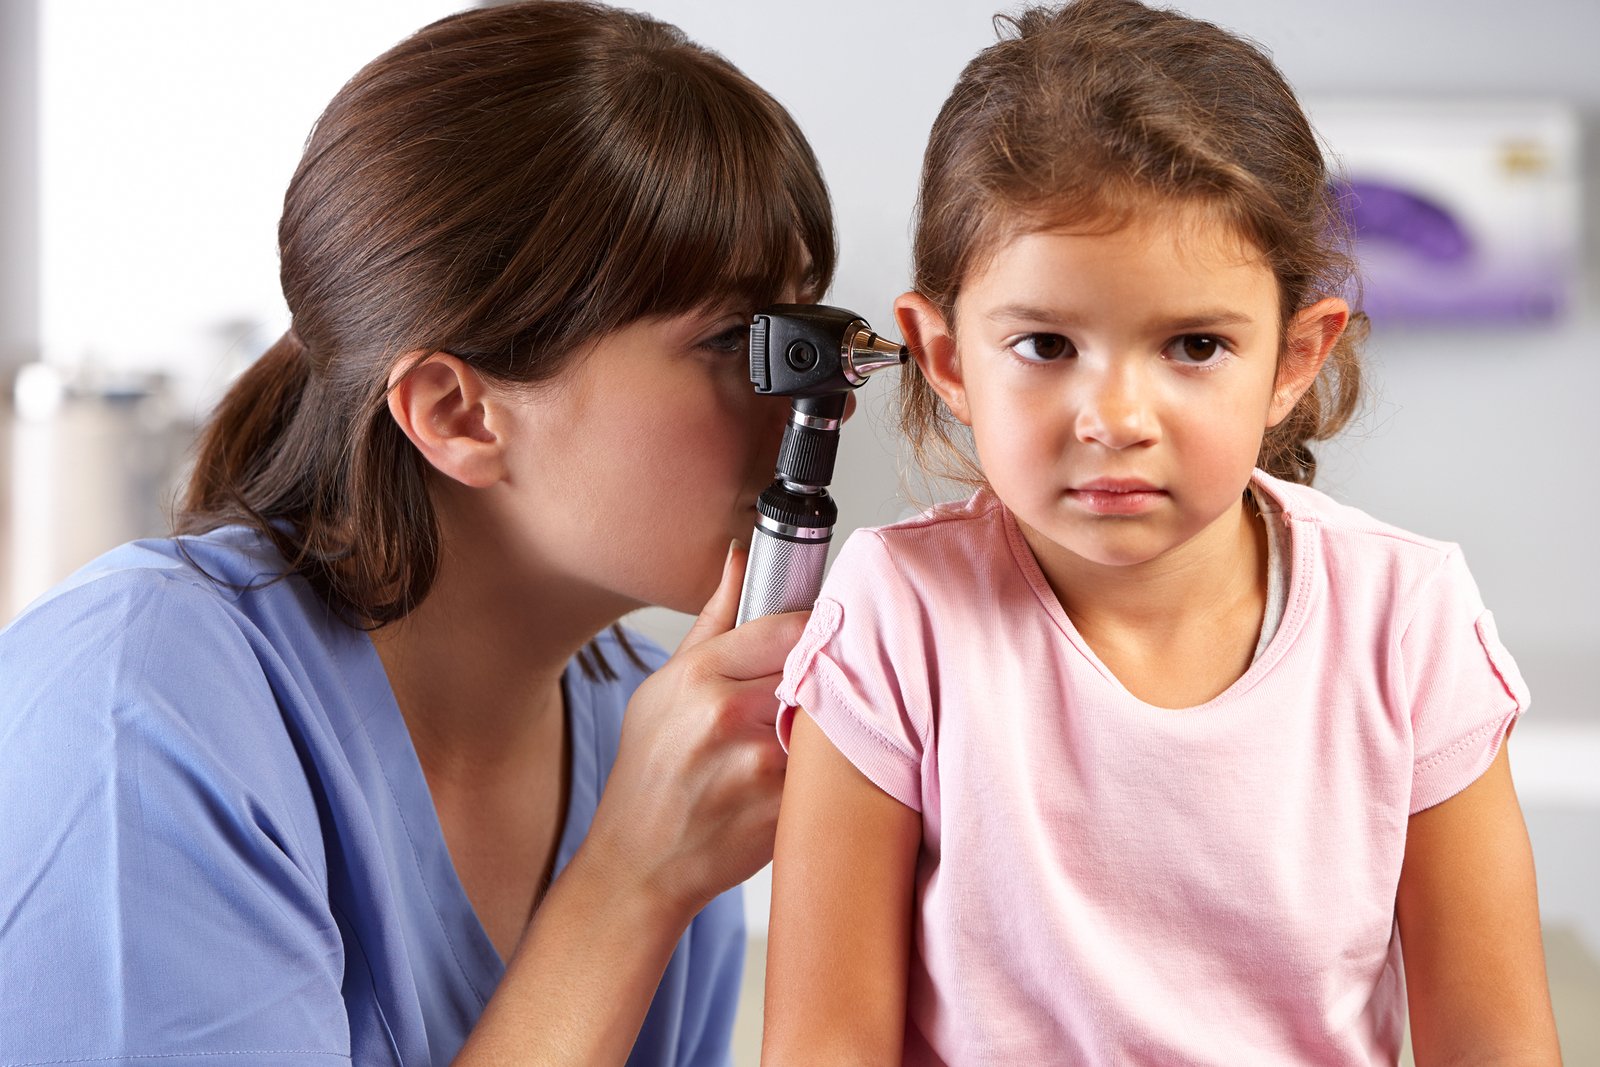 Pediatrics: Top Things to Know About Middle Ear Infections